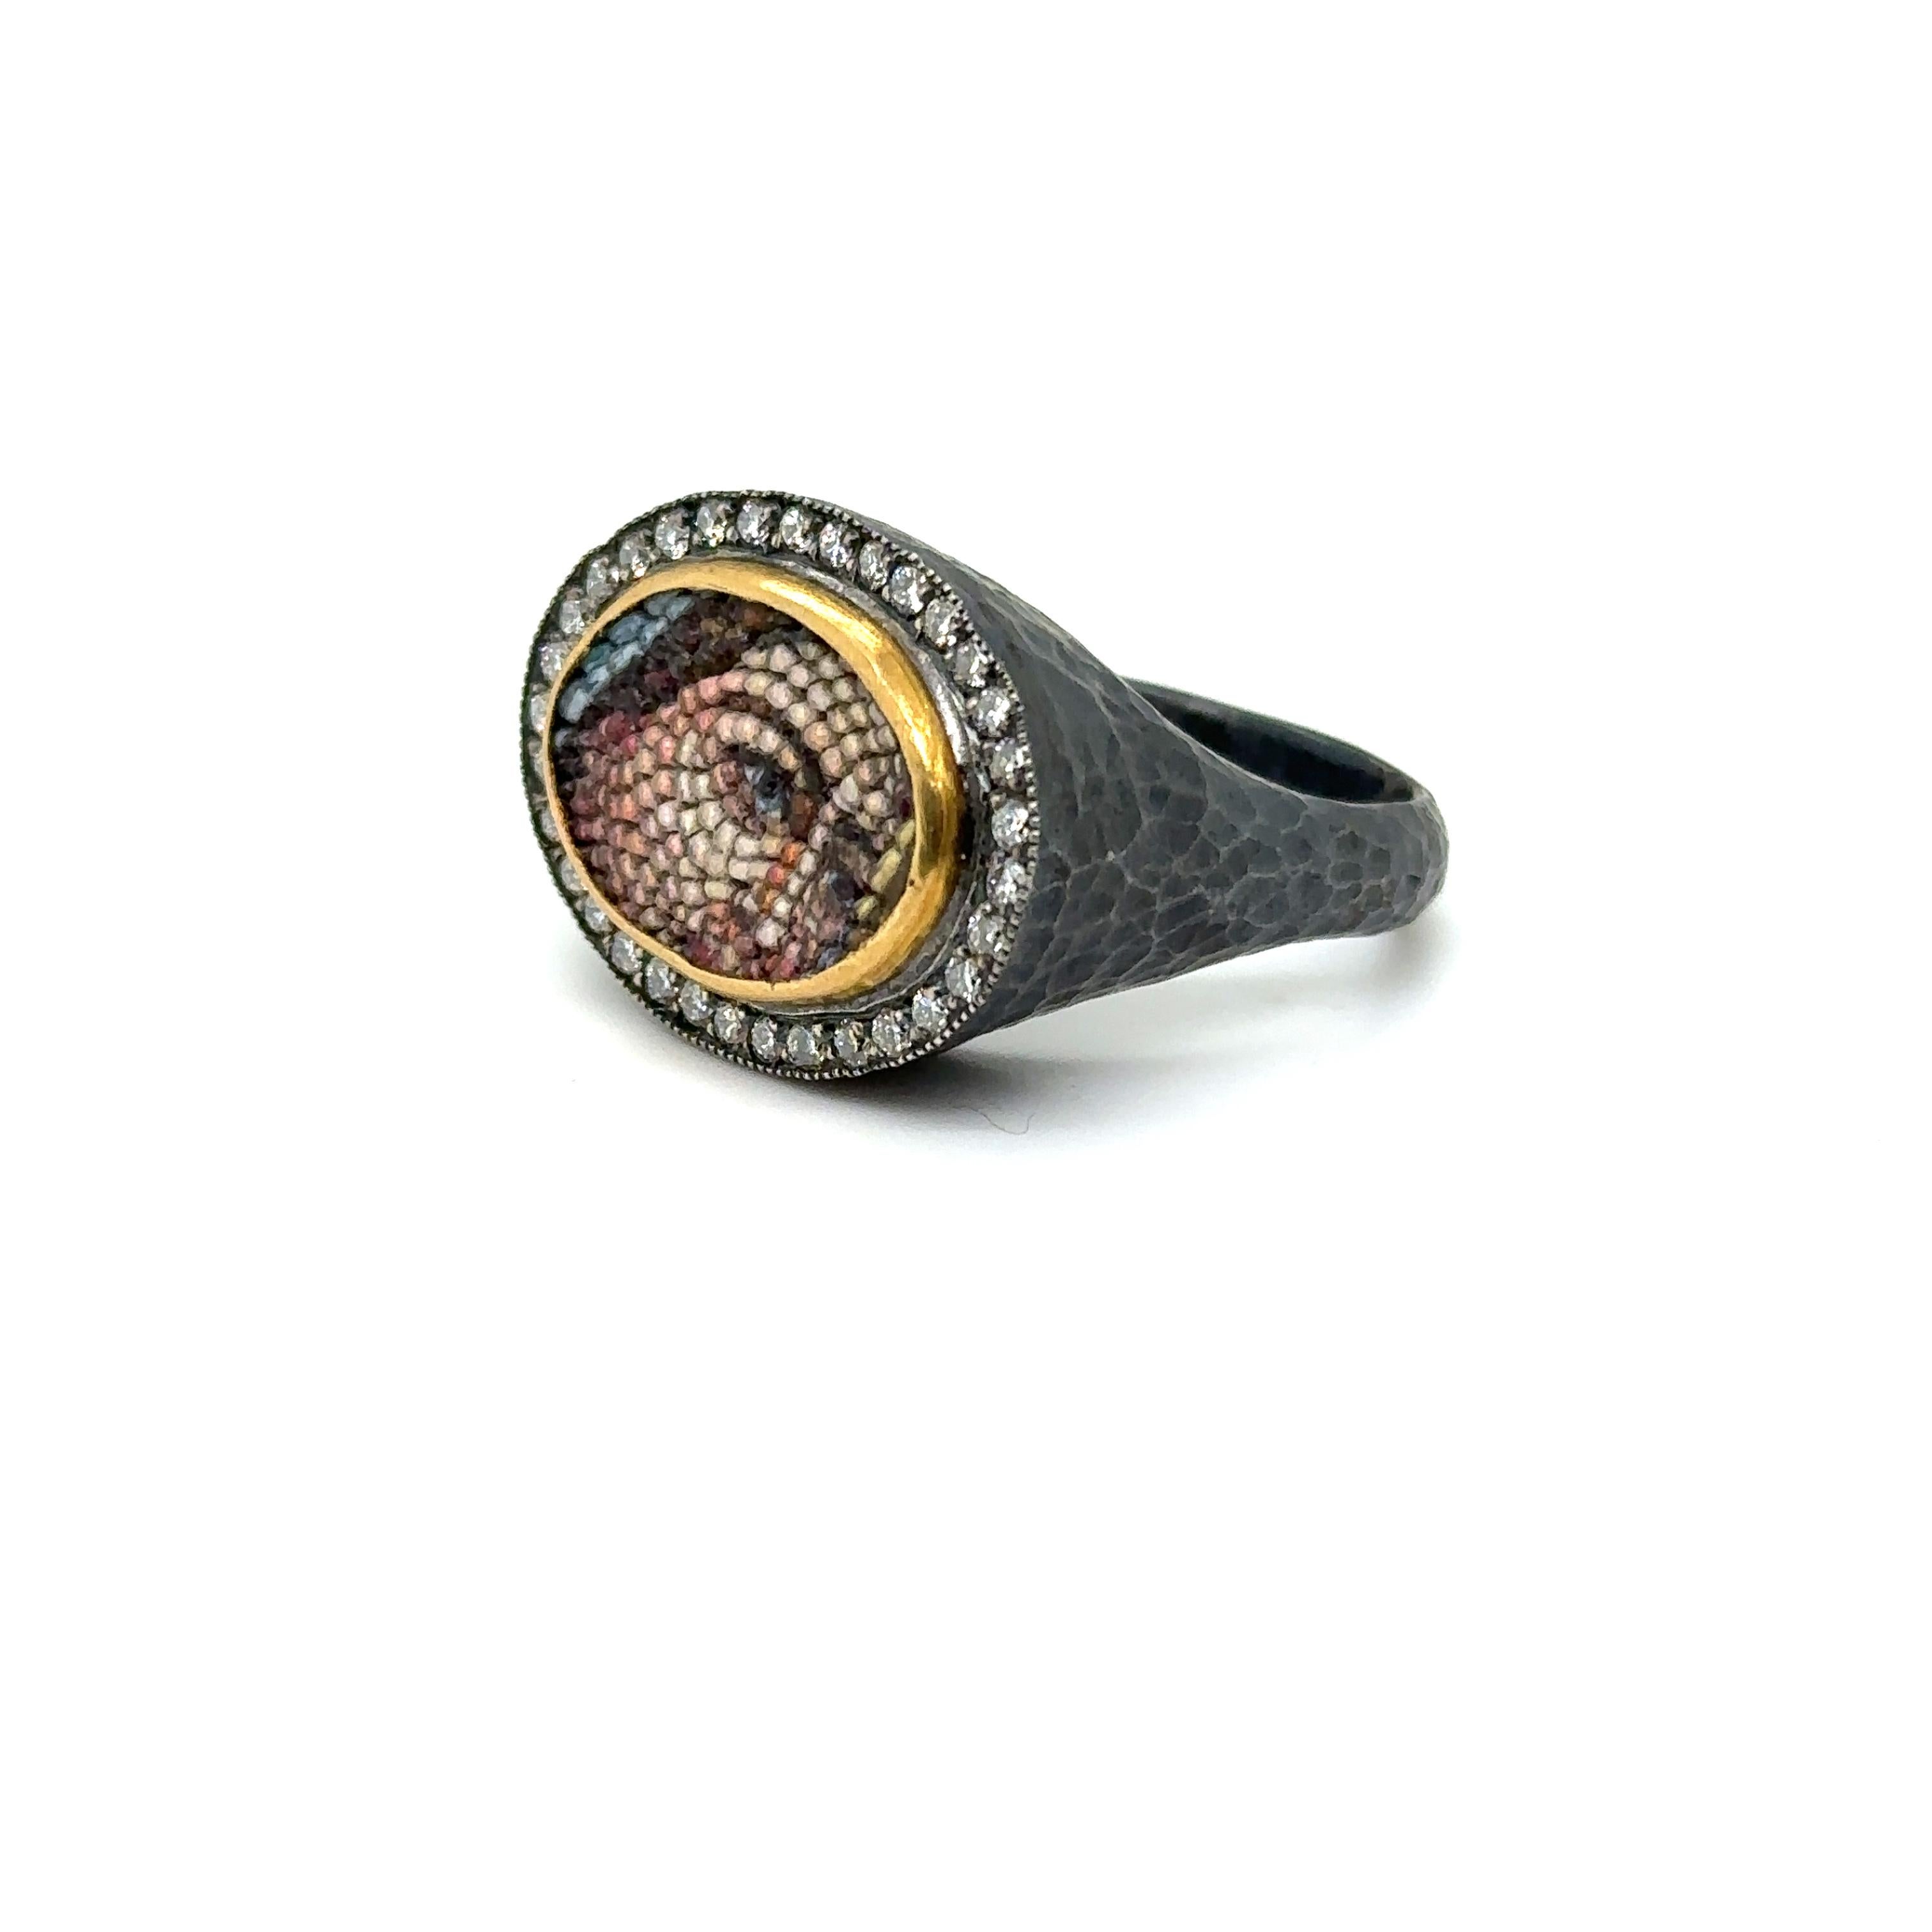 24KT GOLD/SS MICRO MOSAIC RING WITH 0.50CT DIAMONDS 
Metal: 24K GOLD/OXIDIZED SS
Diamond Info: 
I/J COLOR SI1/2 ROUND BRILLIANT DIAMONDS
Total Ct Weight:   0.50 cwt.
Item Weight   12.50 gm
Ring Size:   8 (Re-sizable)
Measurements:  17 mm x 22.50 mm
